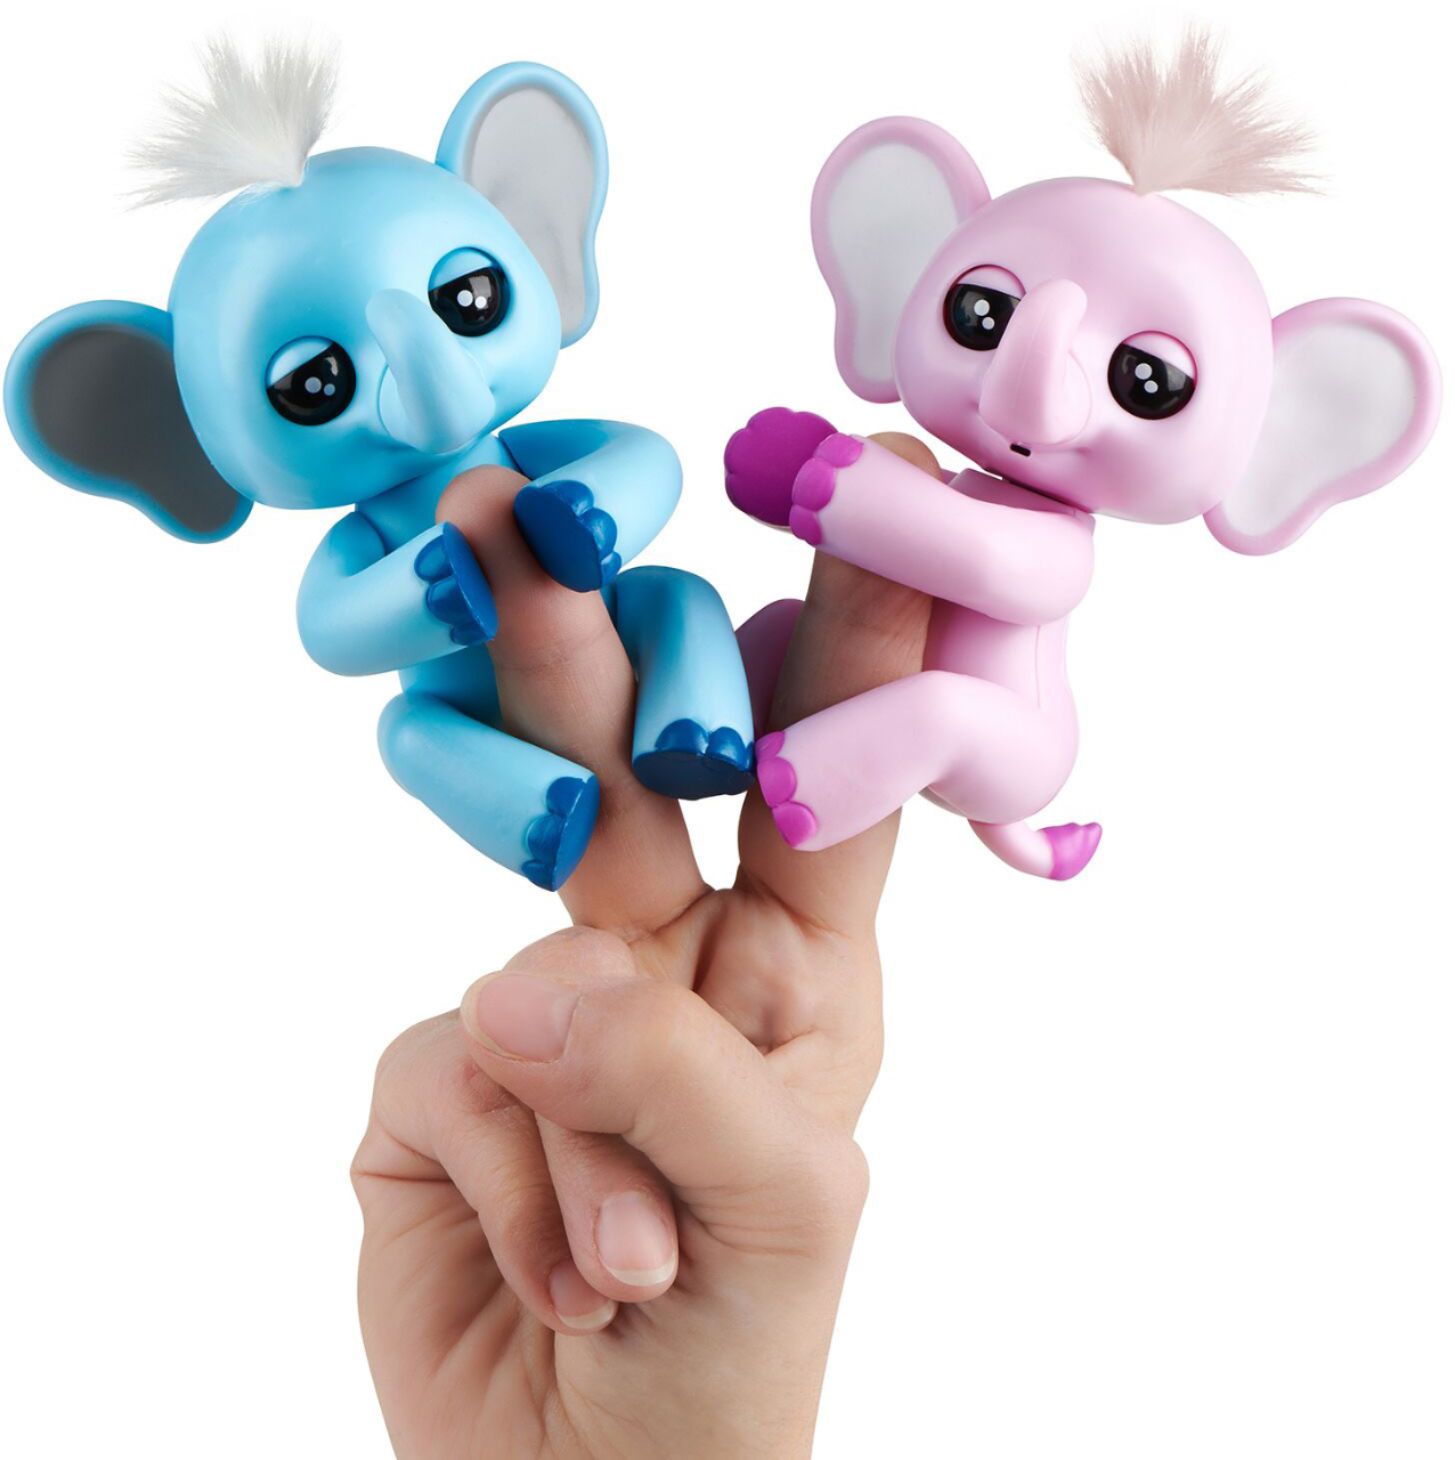 fingerlings what age are they for